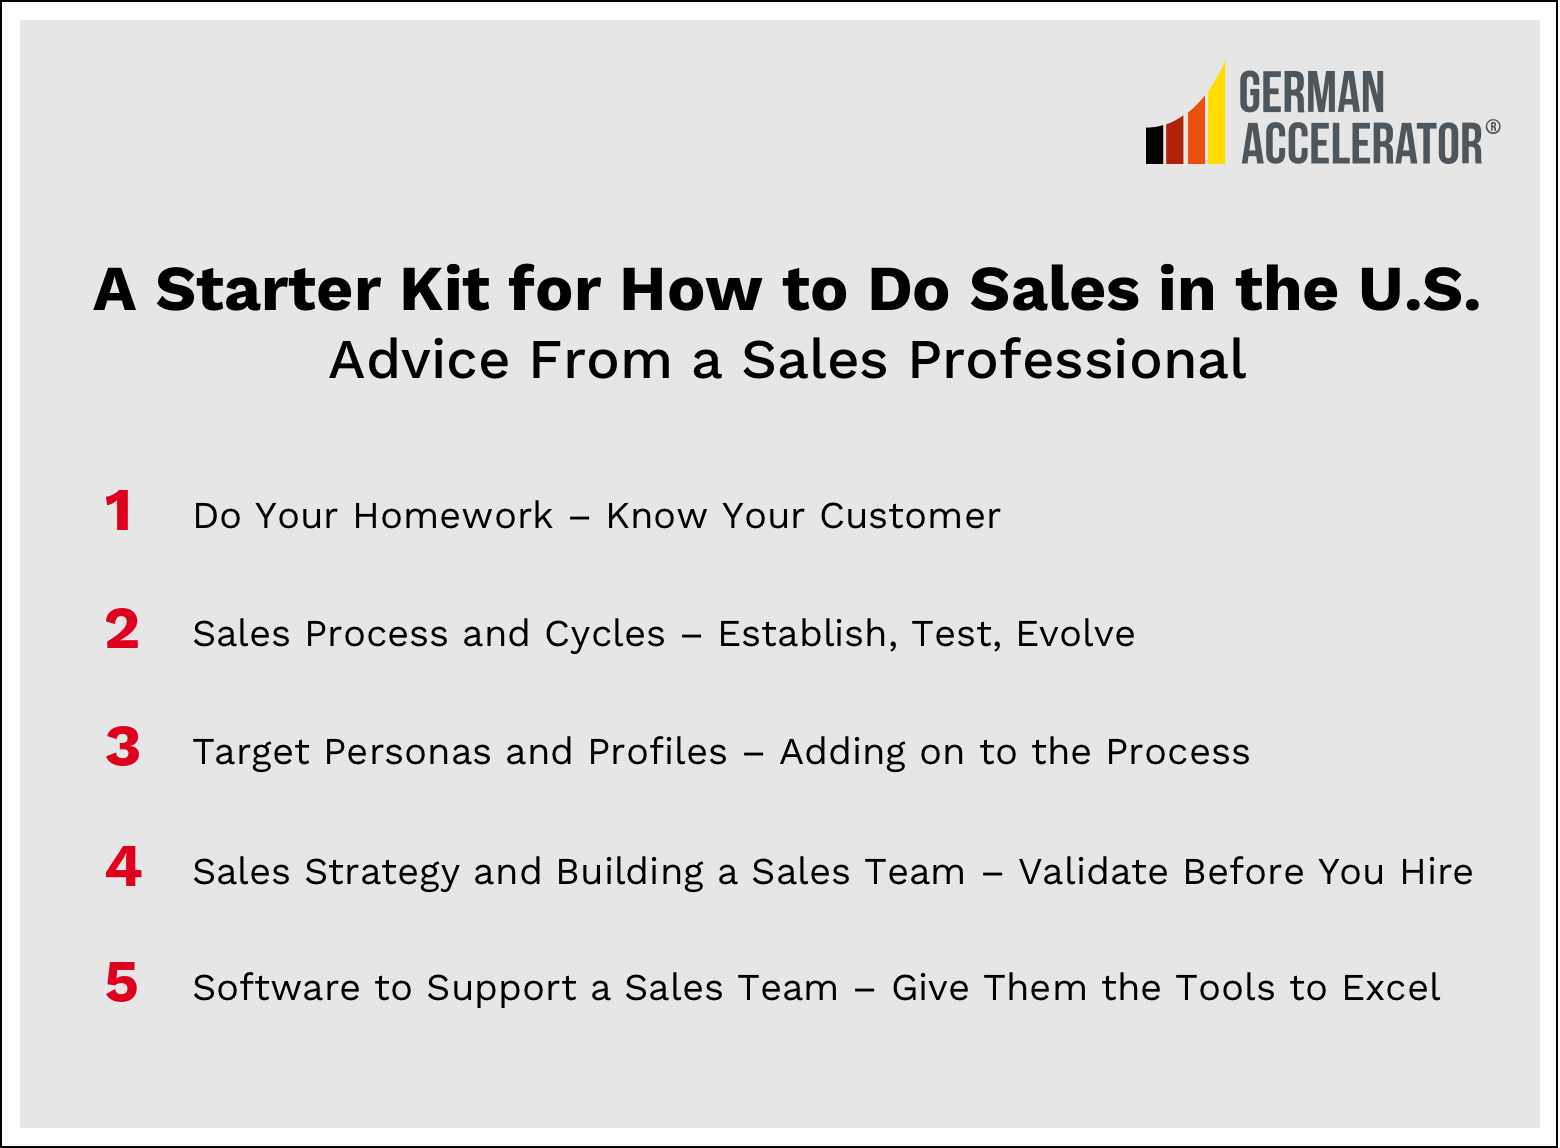 A Starter Kit for How to Do Sales in the U.S.